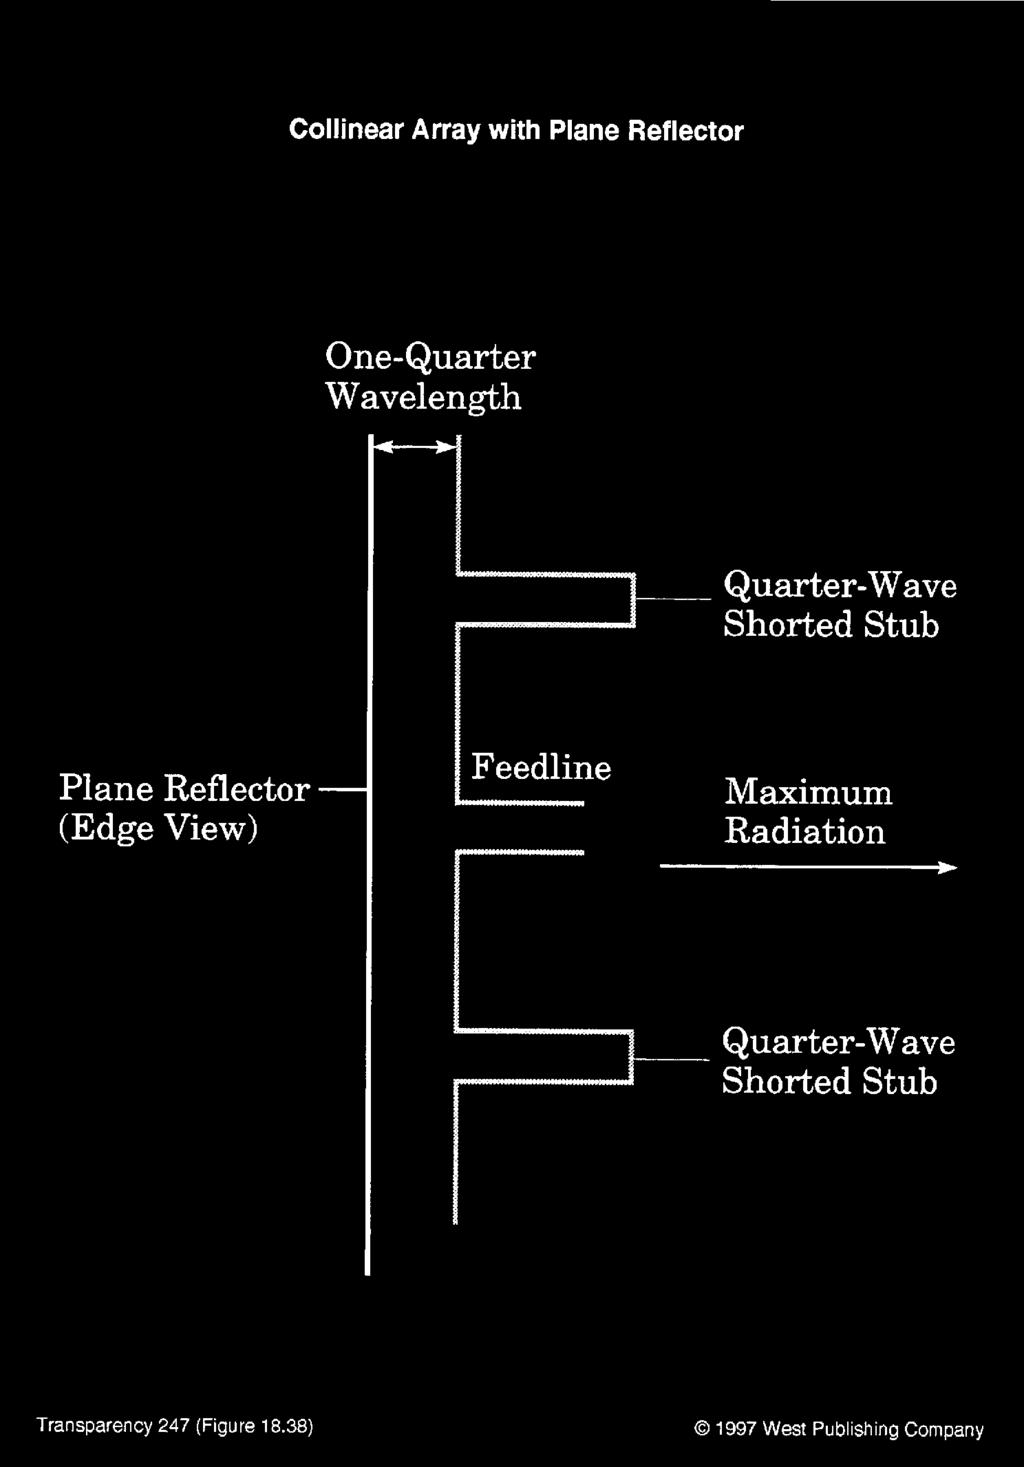 Plane Reflector Mount antenna 1/4 wavelength from flat metallic surface Reflected wave and direct wave are in phase along normal to survace Increases radiation in that direction Corner Reflector More